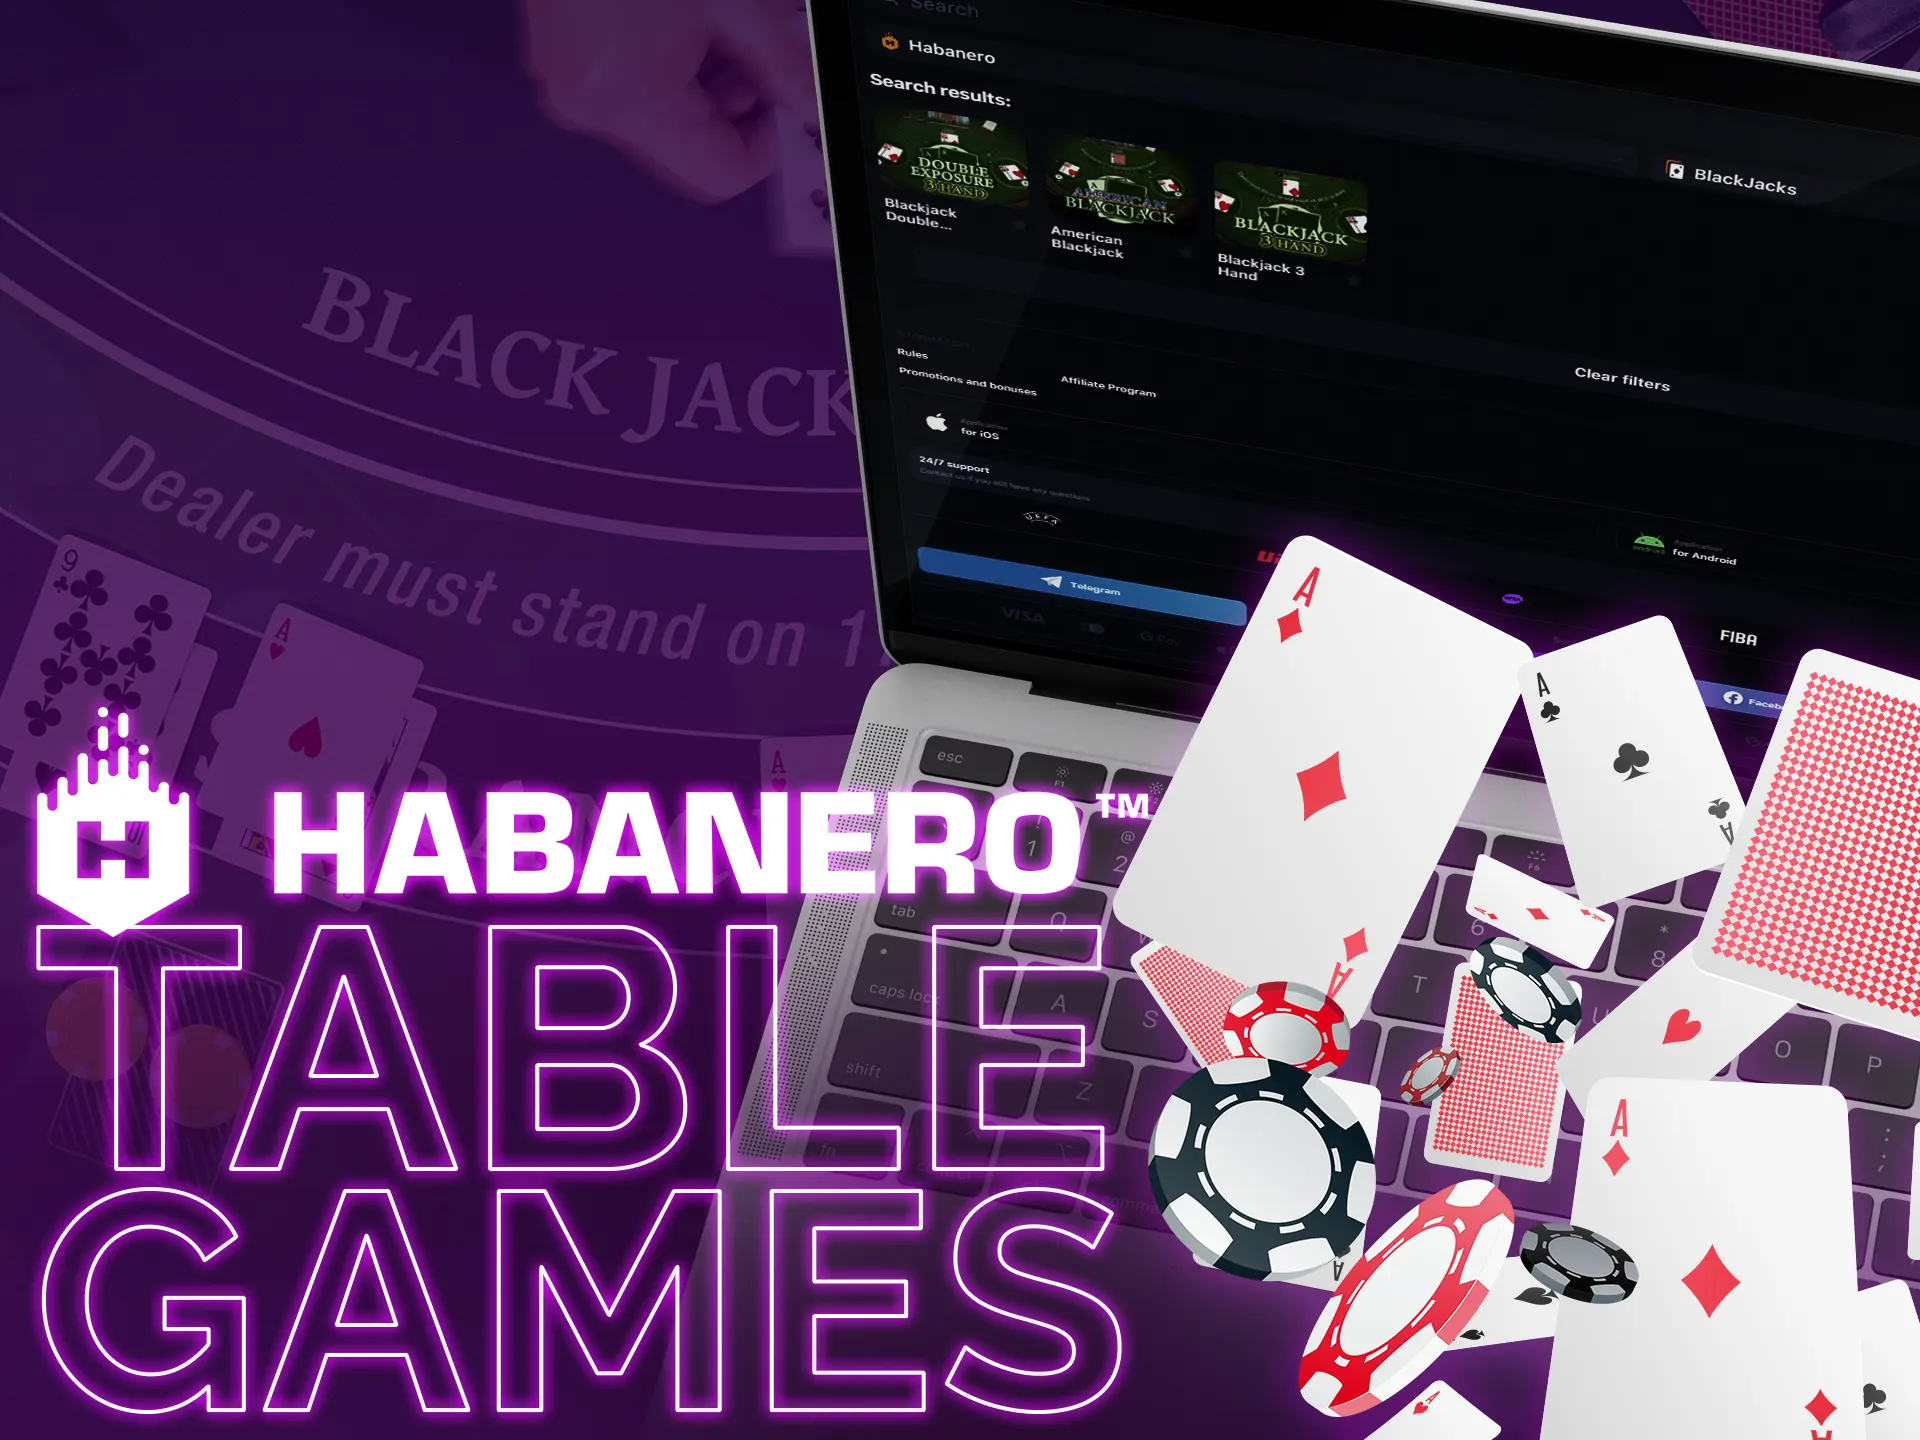 Habanero offers many table games.